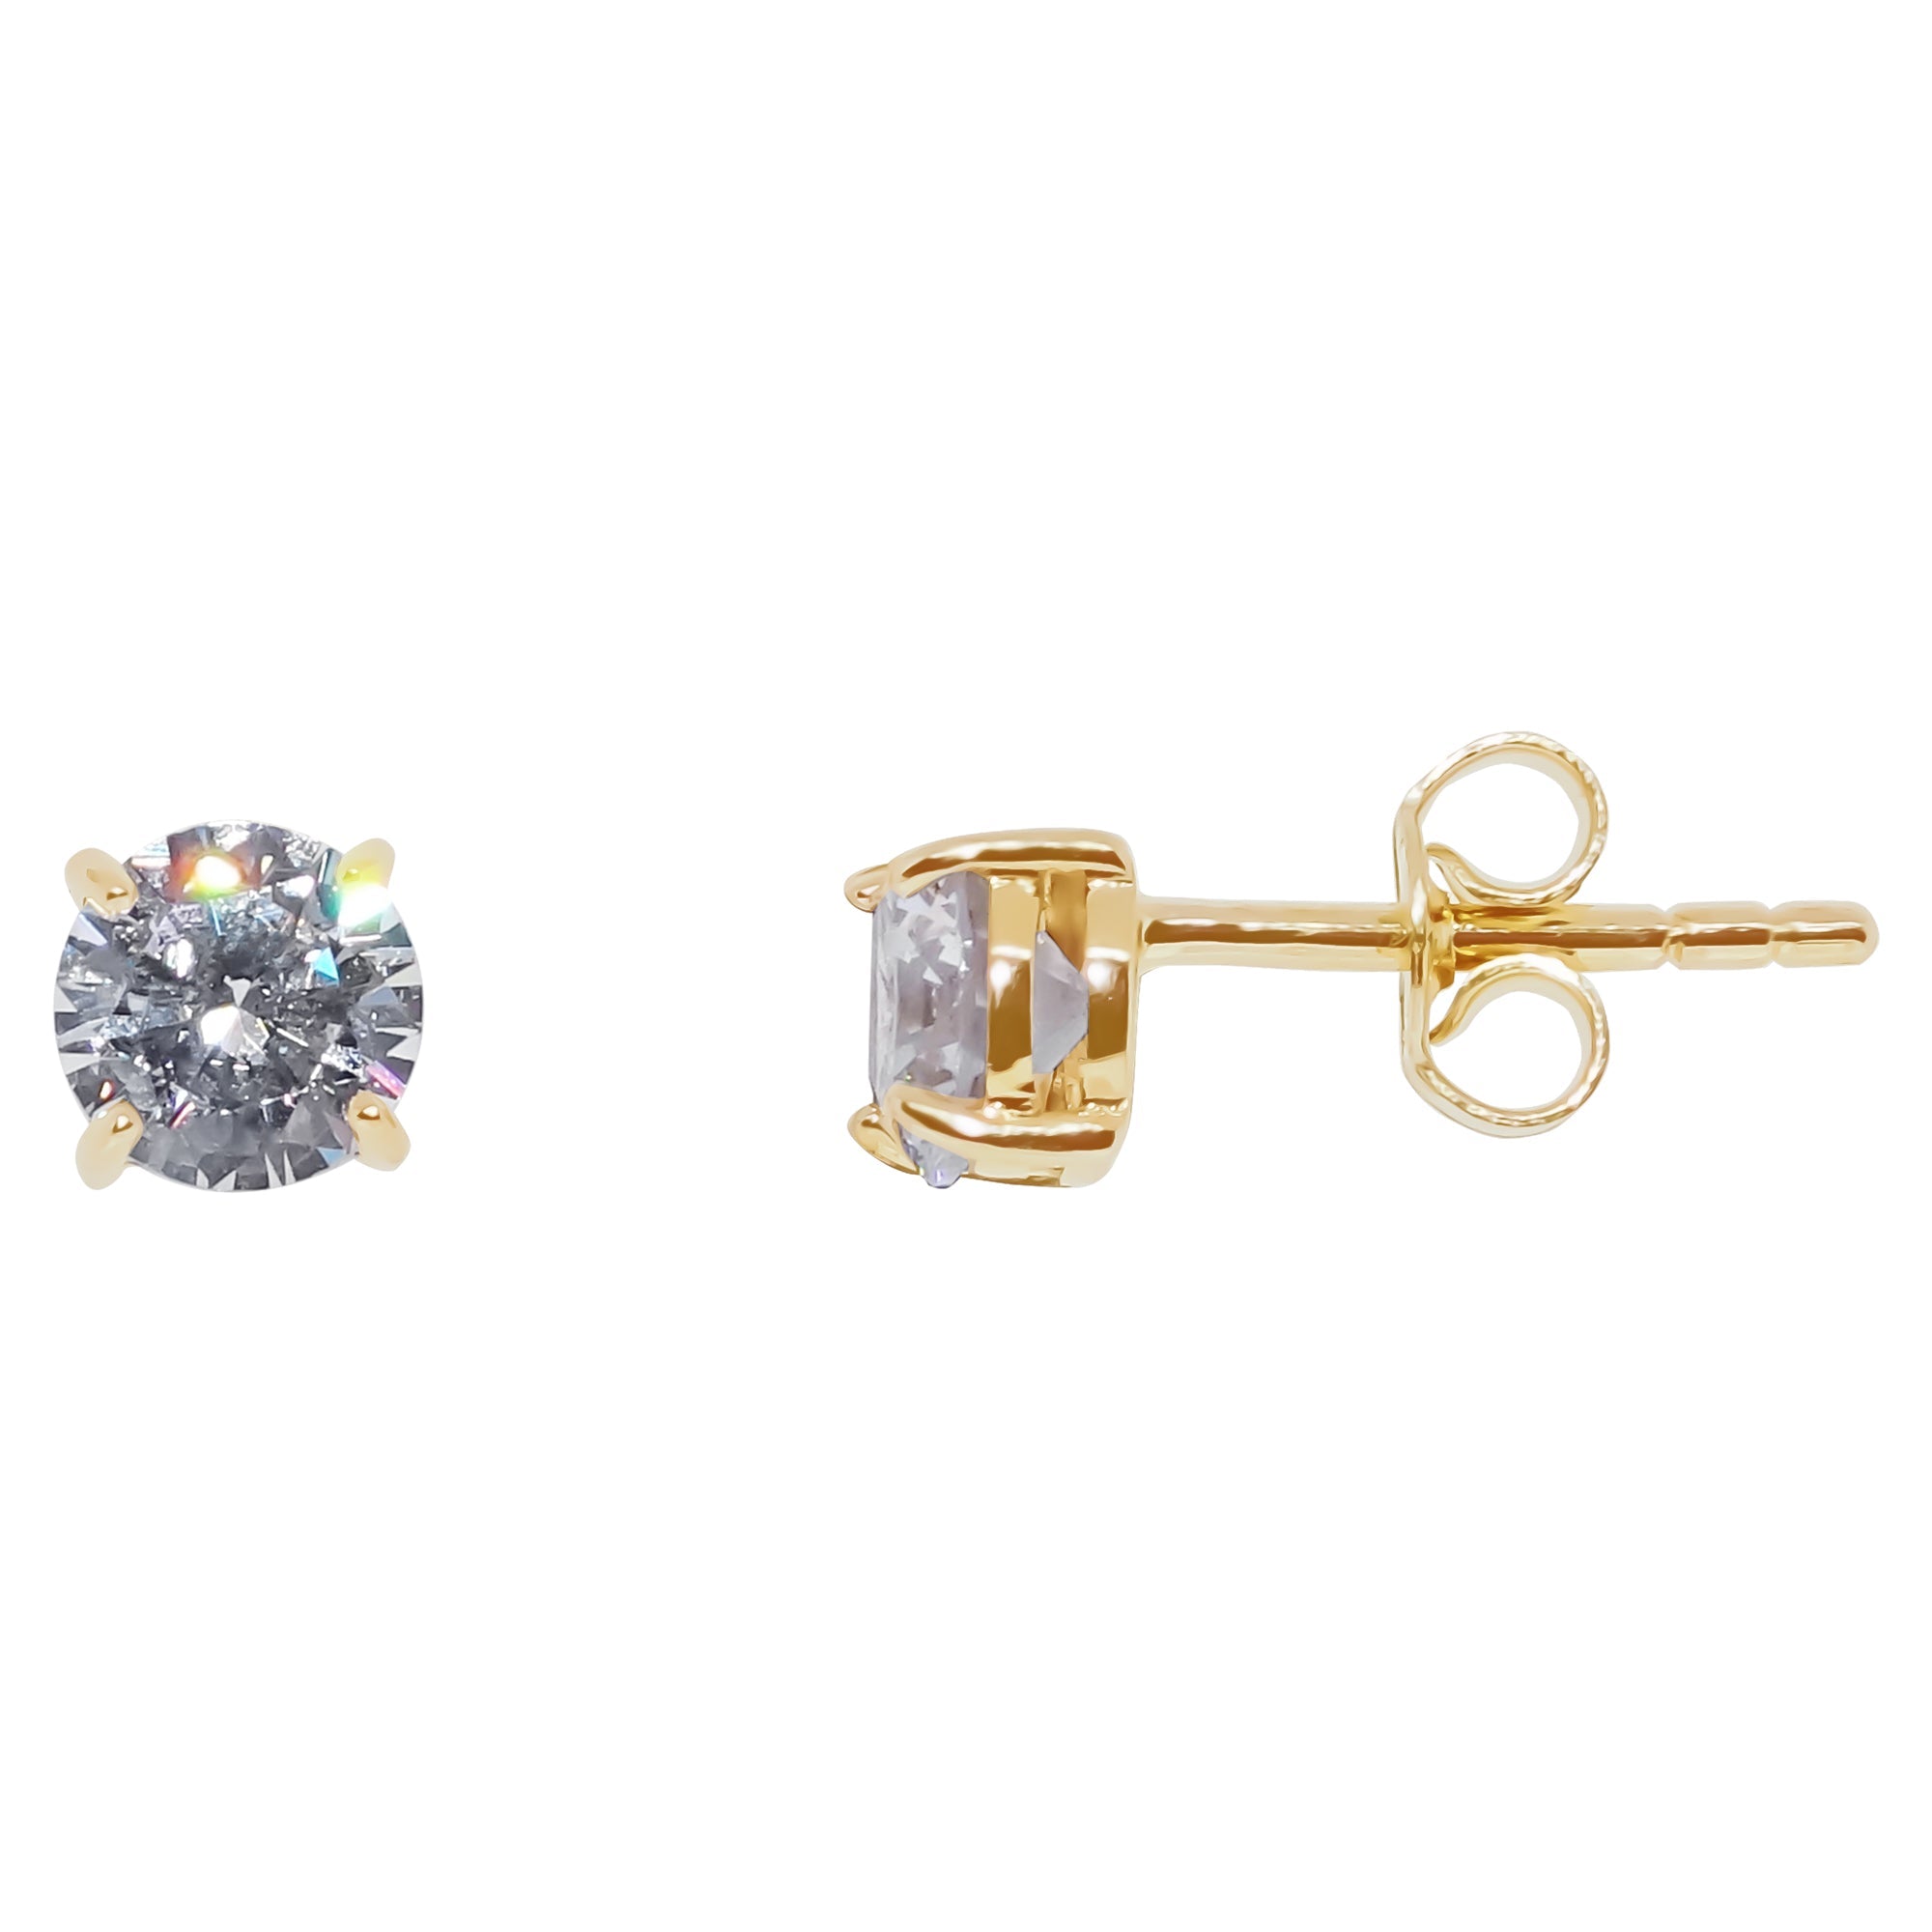 9ct gold 5mm round cz stud earrings